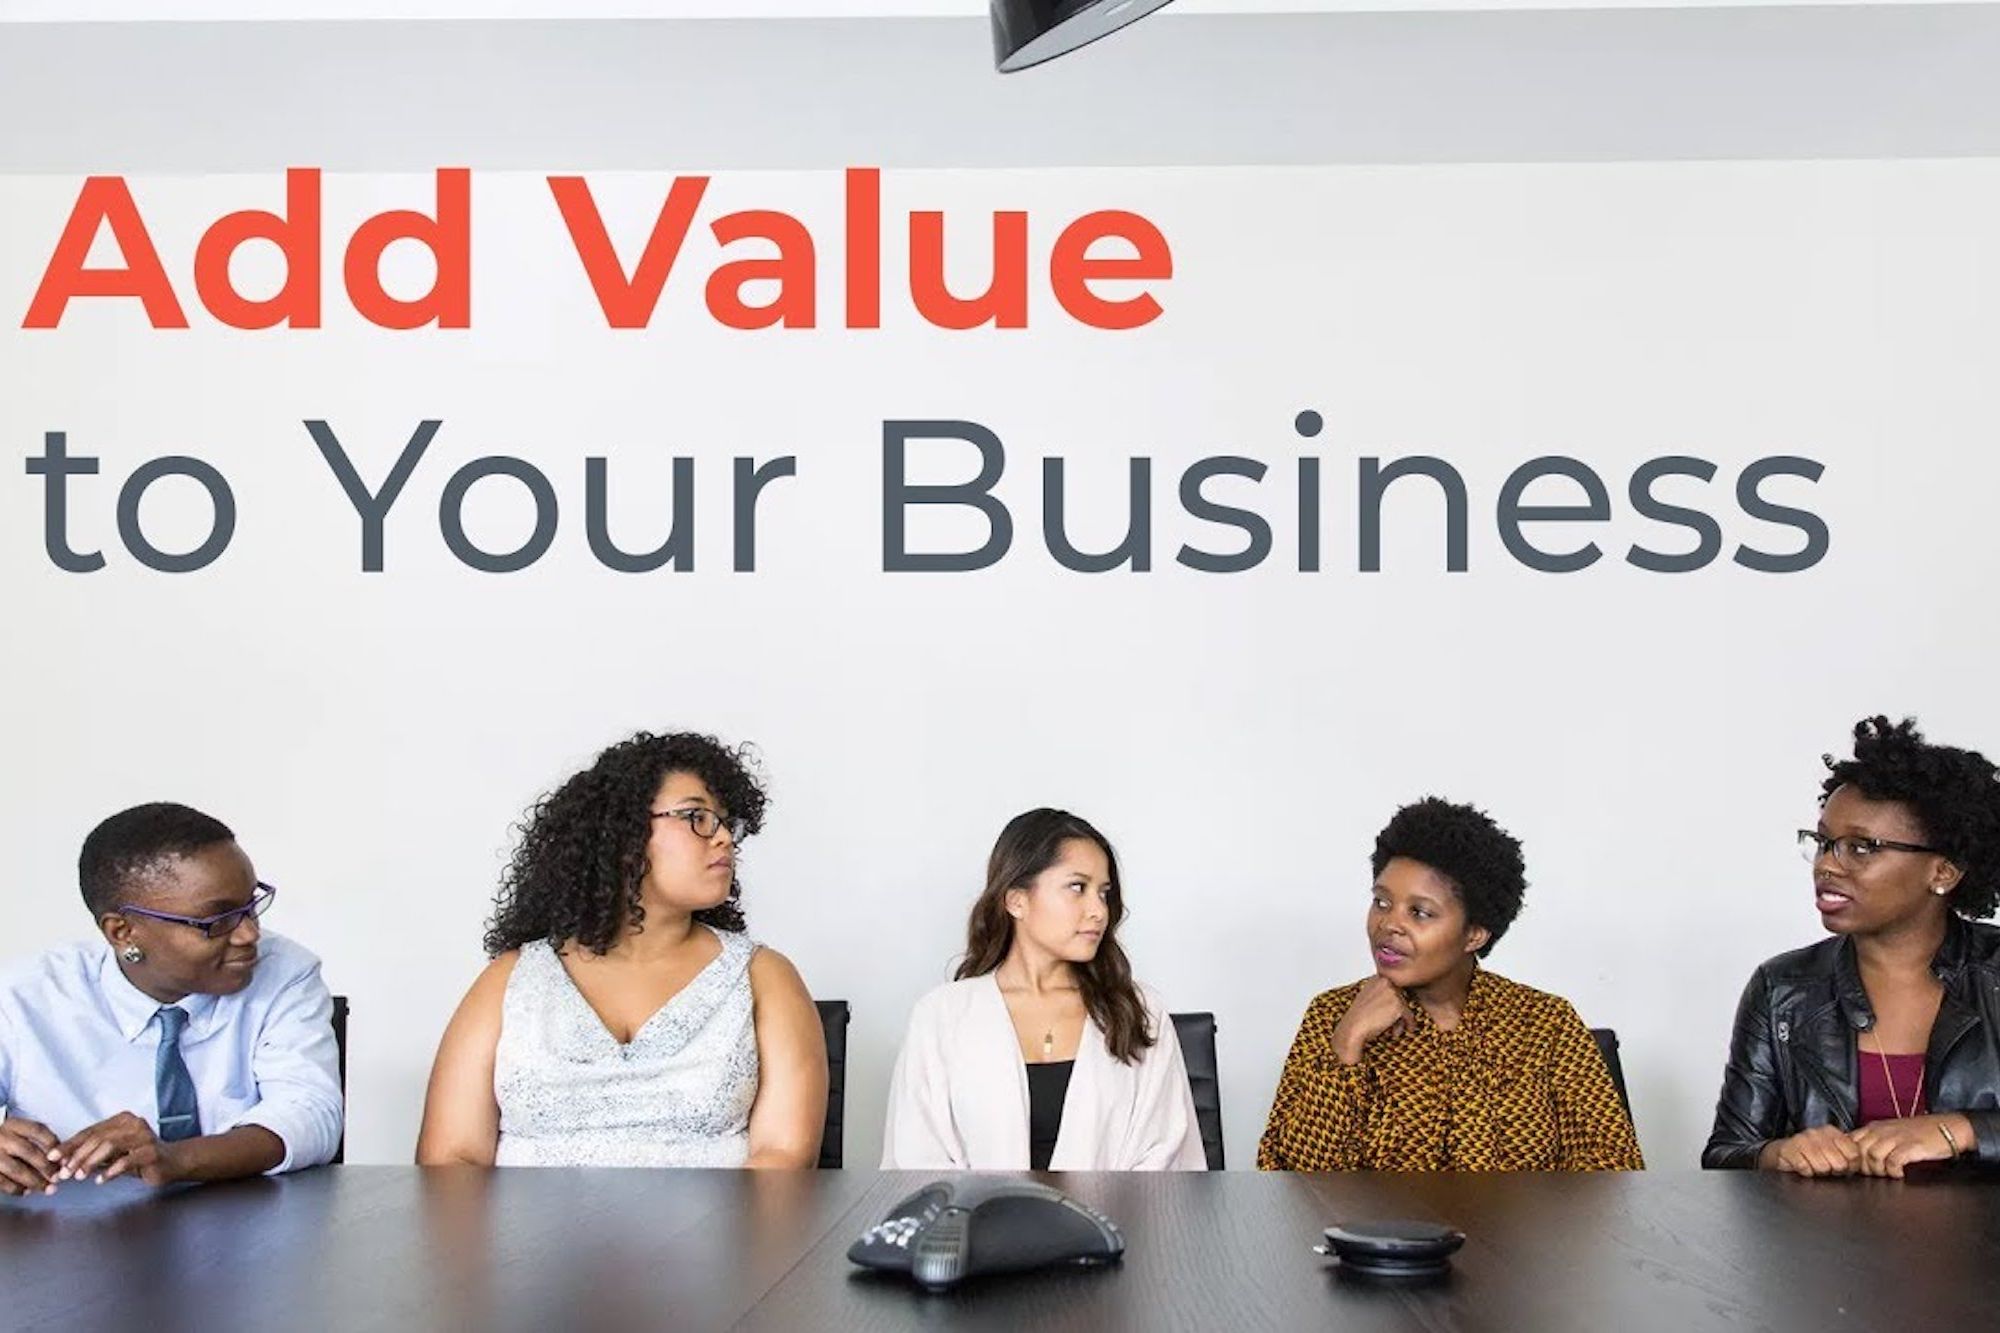 How to Improve Your Business and Add Value for Your Customer